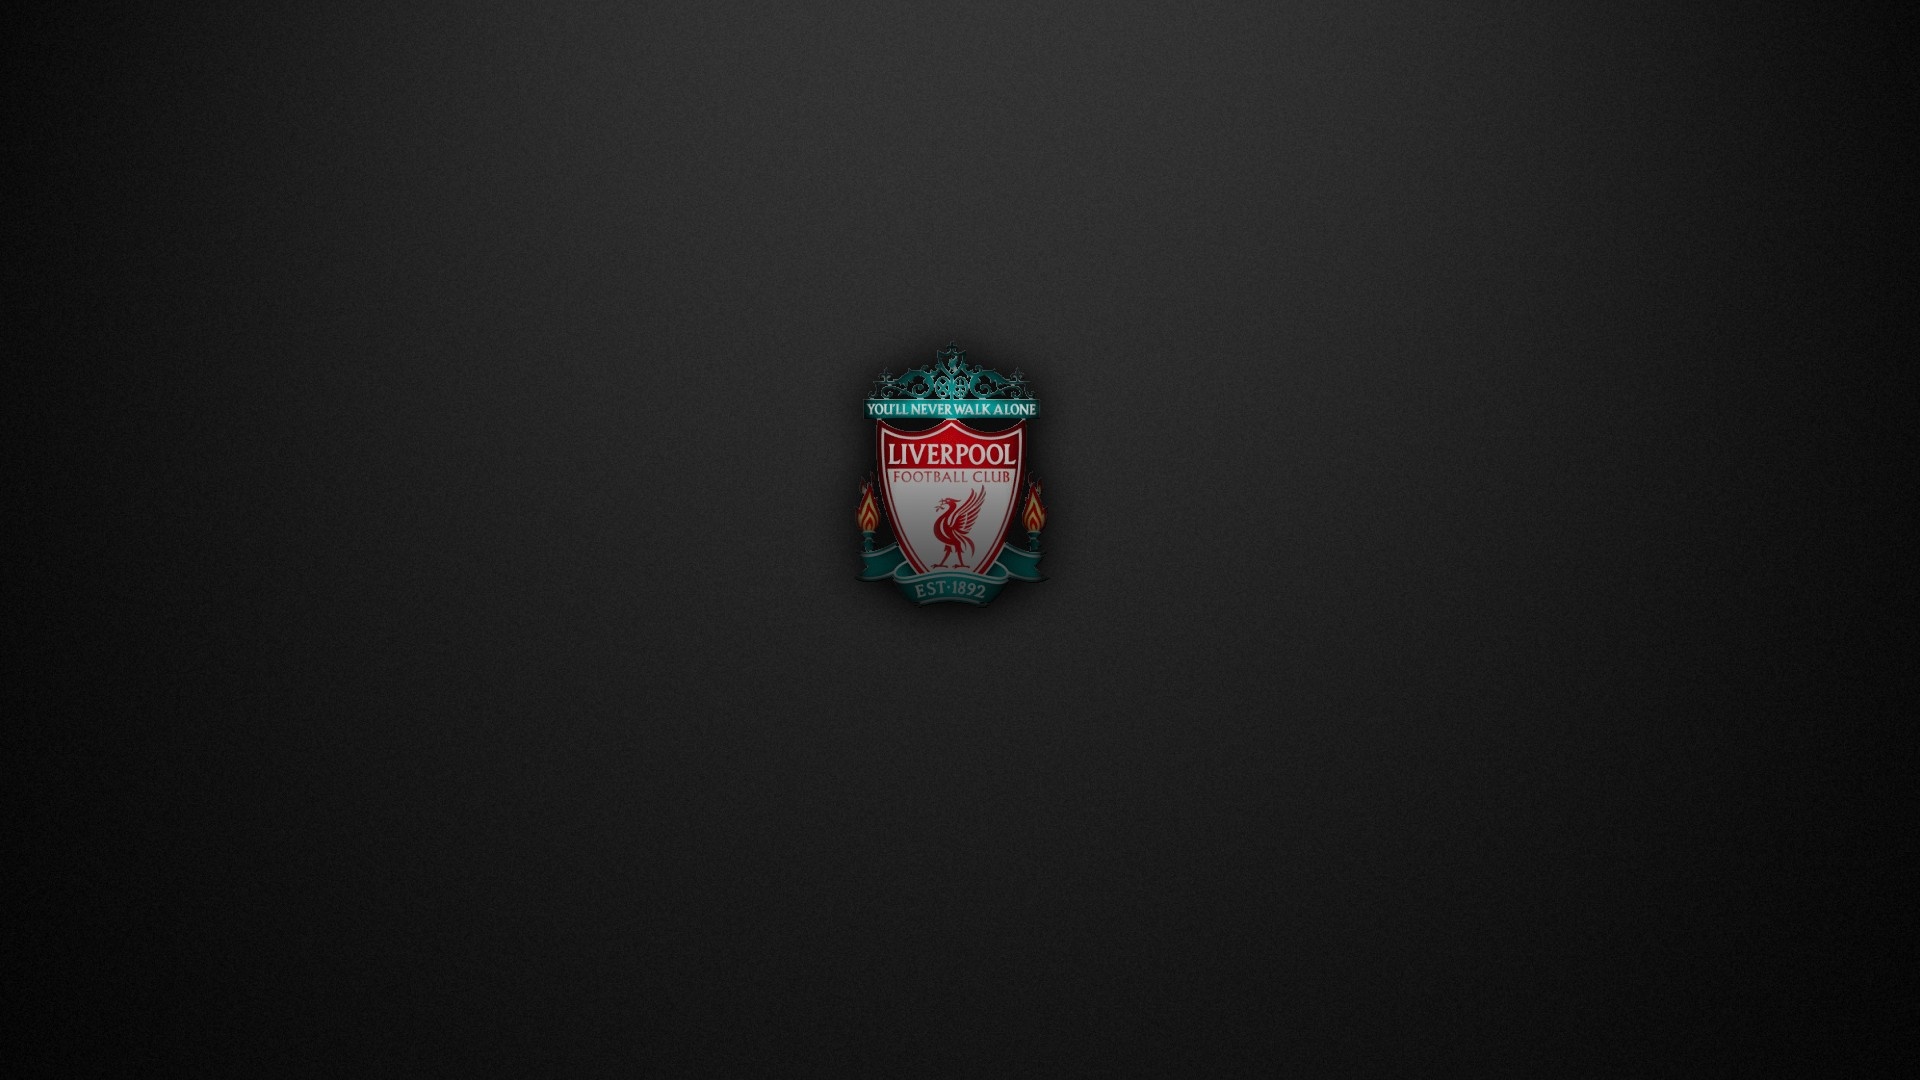 Liverpool Football Club: One of the best supported clubs in the world, more than 200 officially recognized Supporters Clubs in at least 50 countries. 1920x1080 Full HD Background.